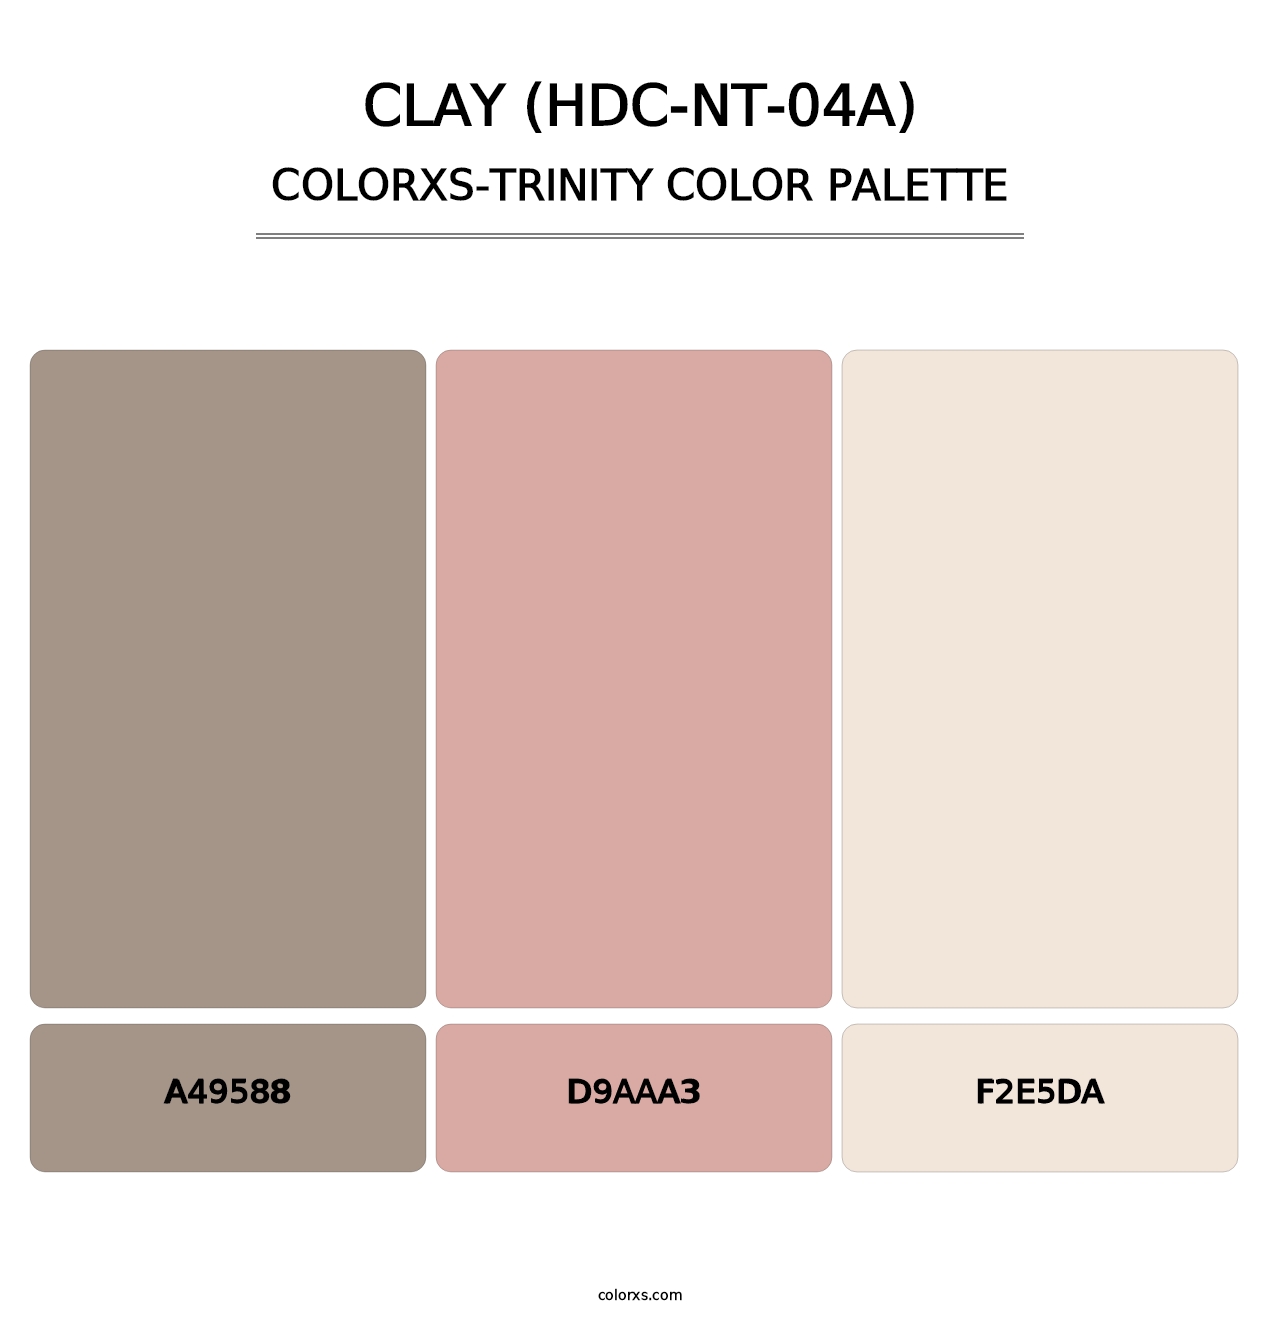 Clay (HDC-NT-04A) - Colorxs Trinity Palette